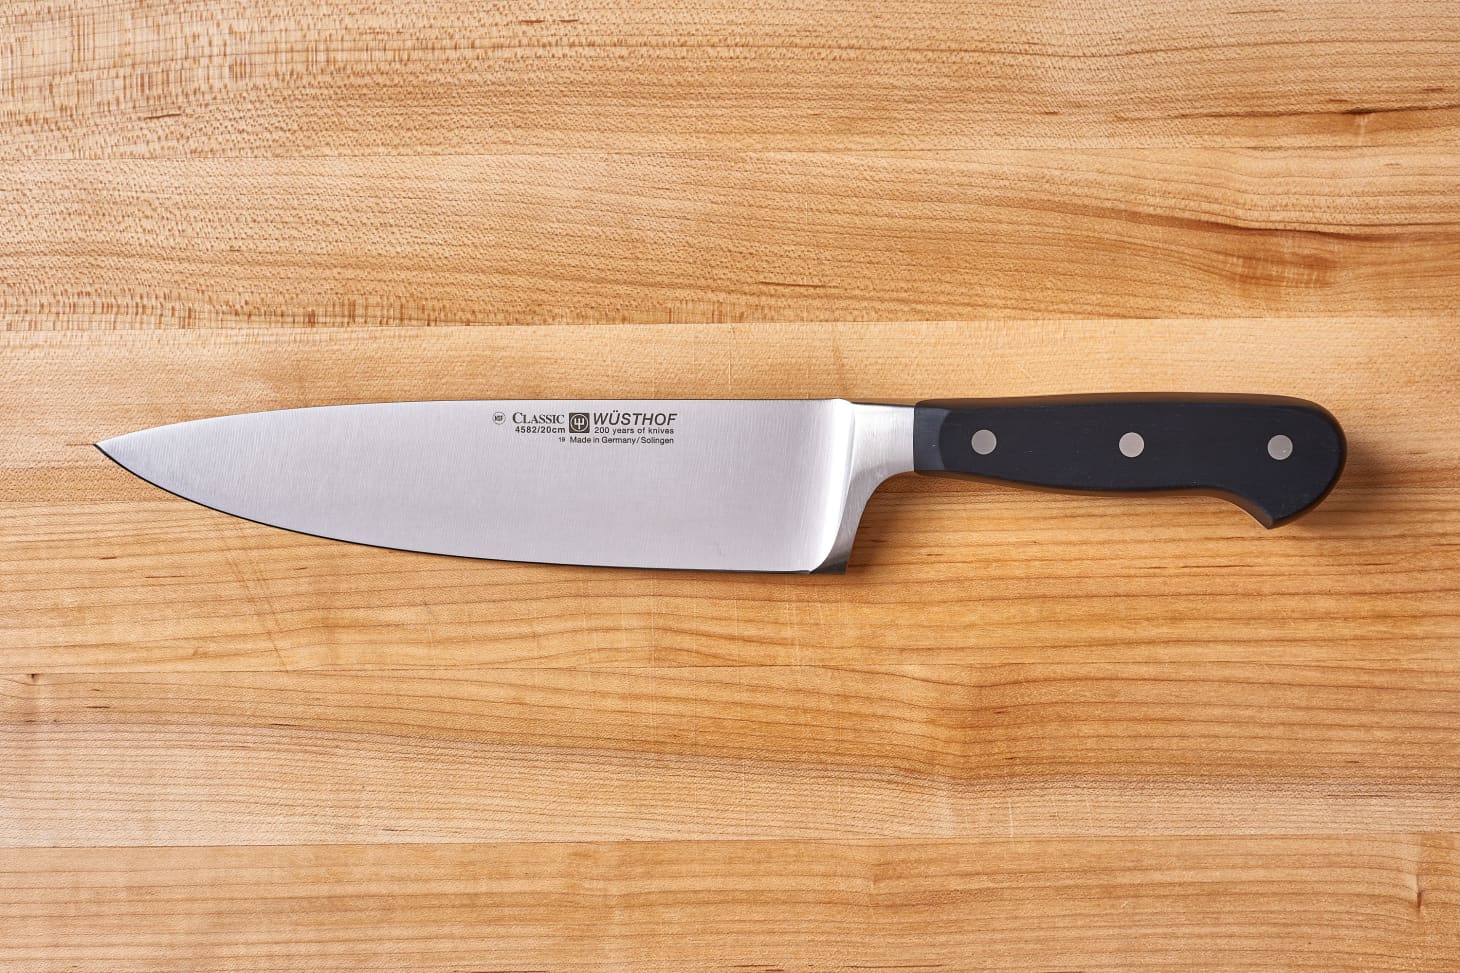 The Best Chefs Knives For Home Cooks In 2018 Kitchn